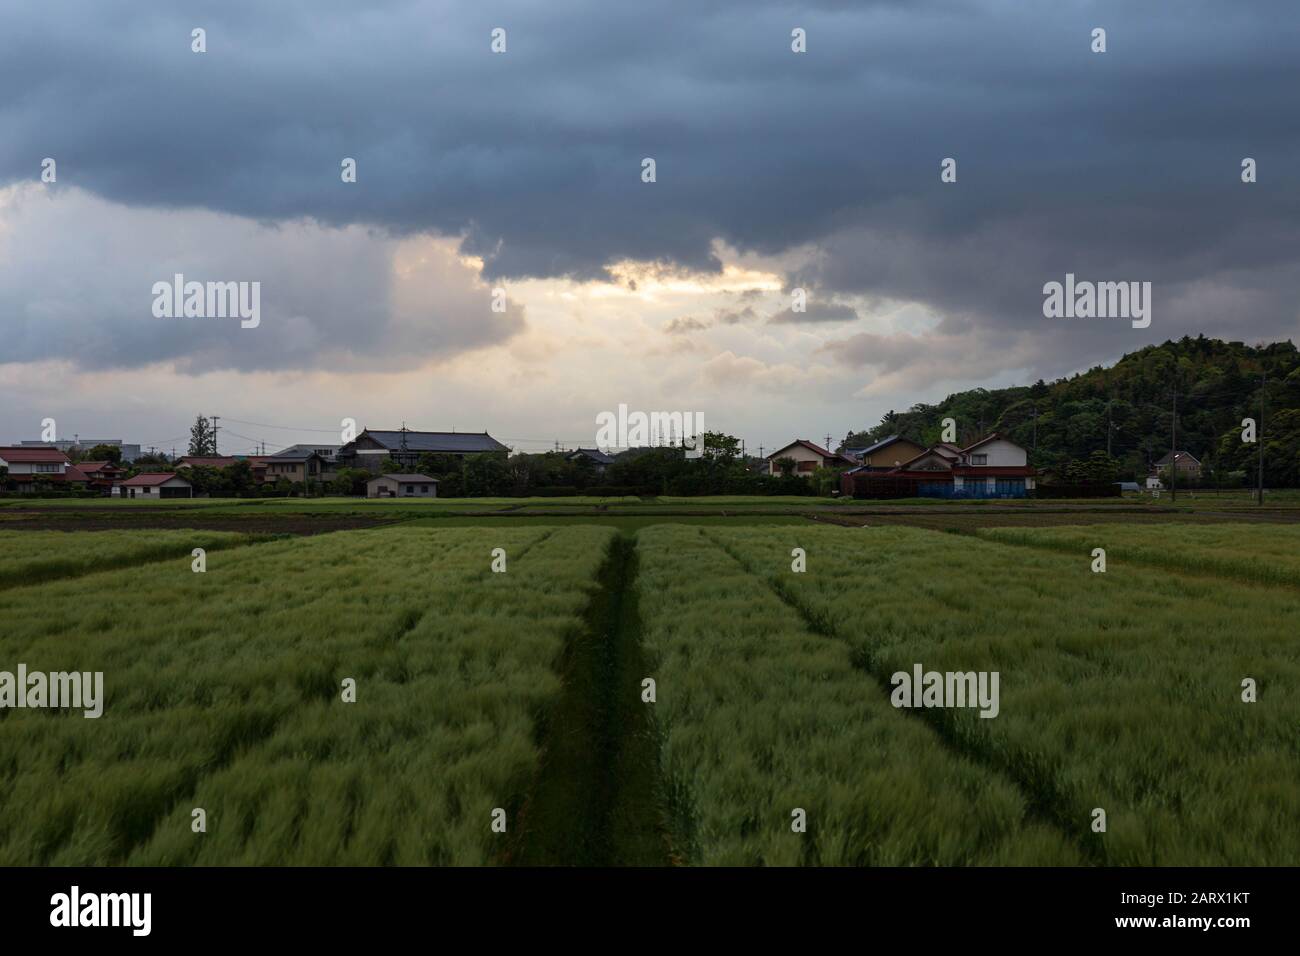 First light breaks through storm clouds over rows of rice near small Japanese farming village Stock Photo